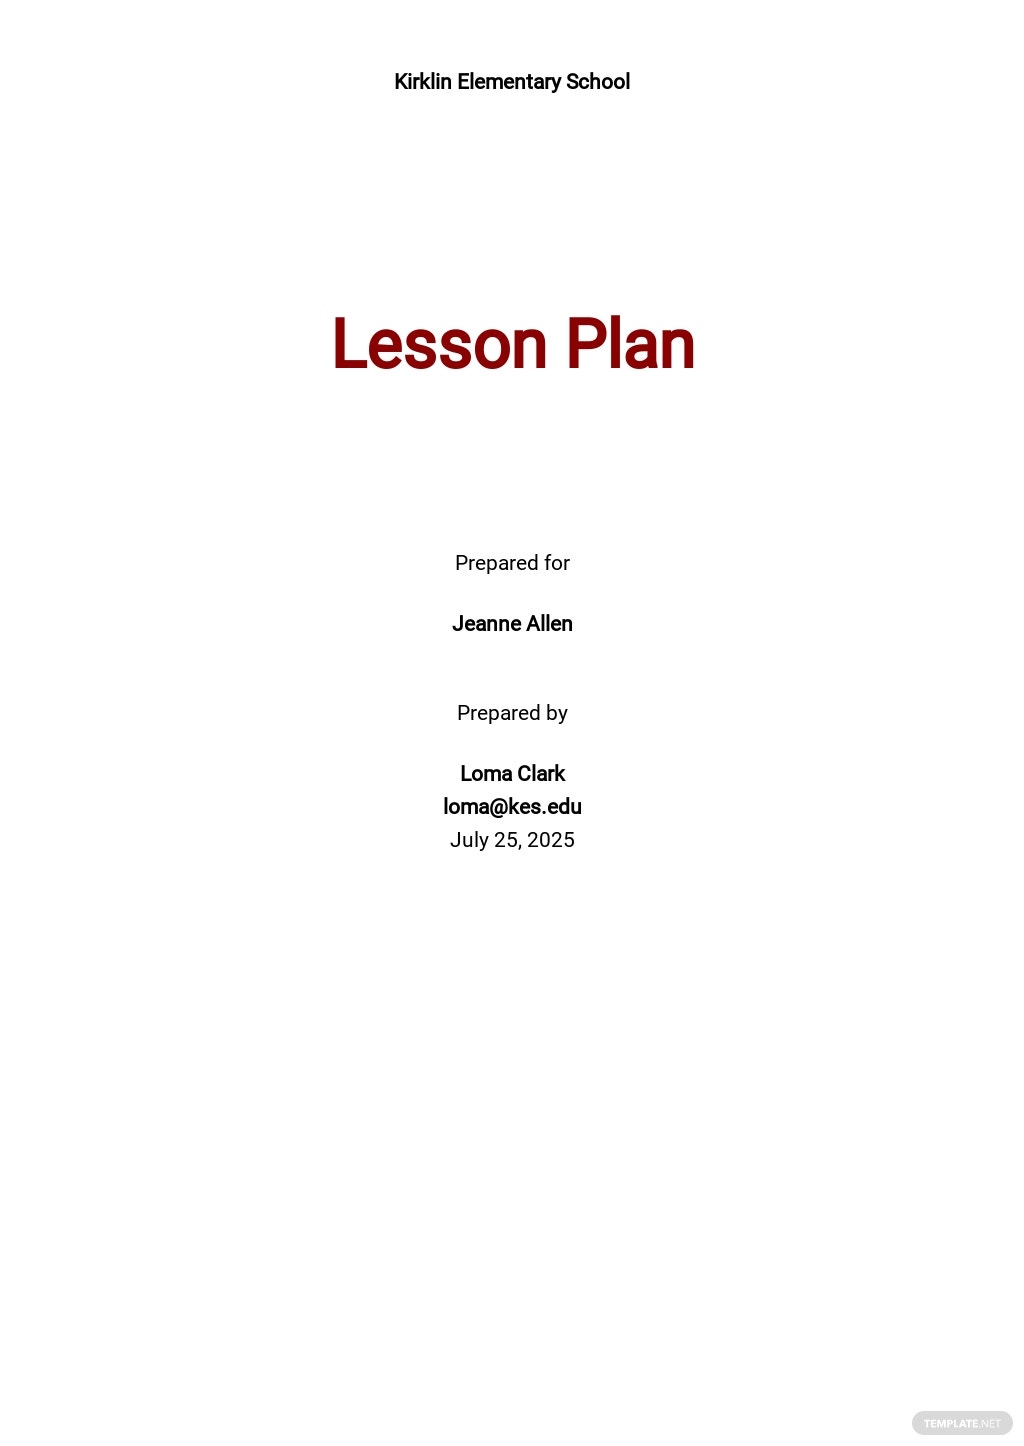 50+ Lesson Plan Samples, Format & Examples 2023